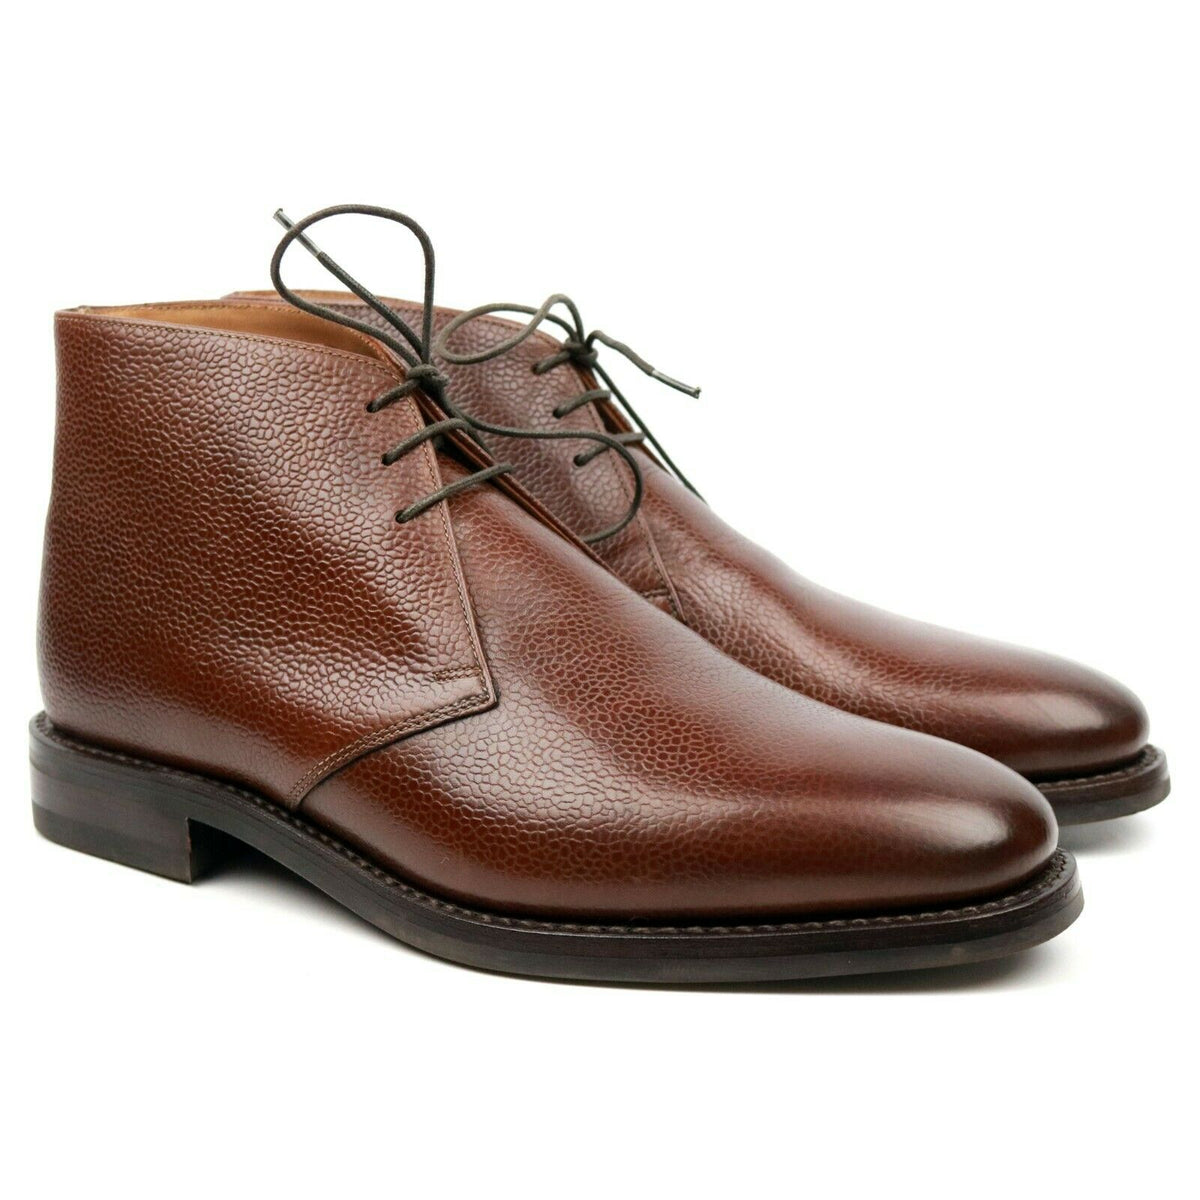 Loake Design 'Andrew' Brown Leather 